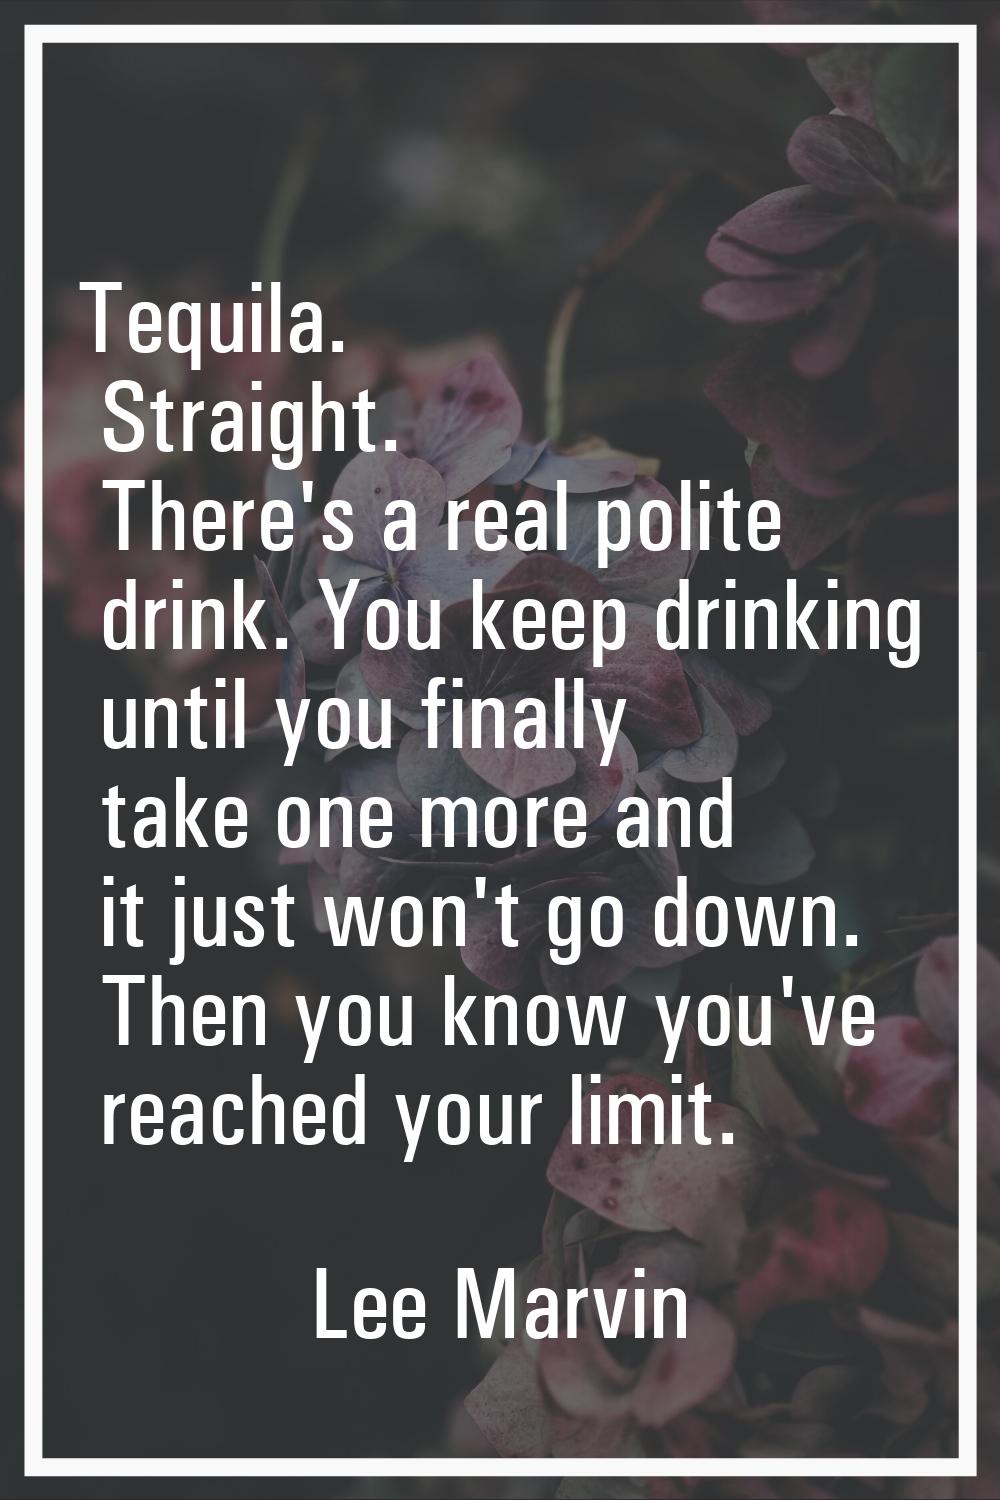 Tequila. Straight. There's a real polite drink. You keep drinking until you finally take one more a